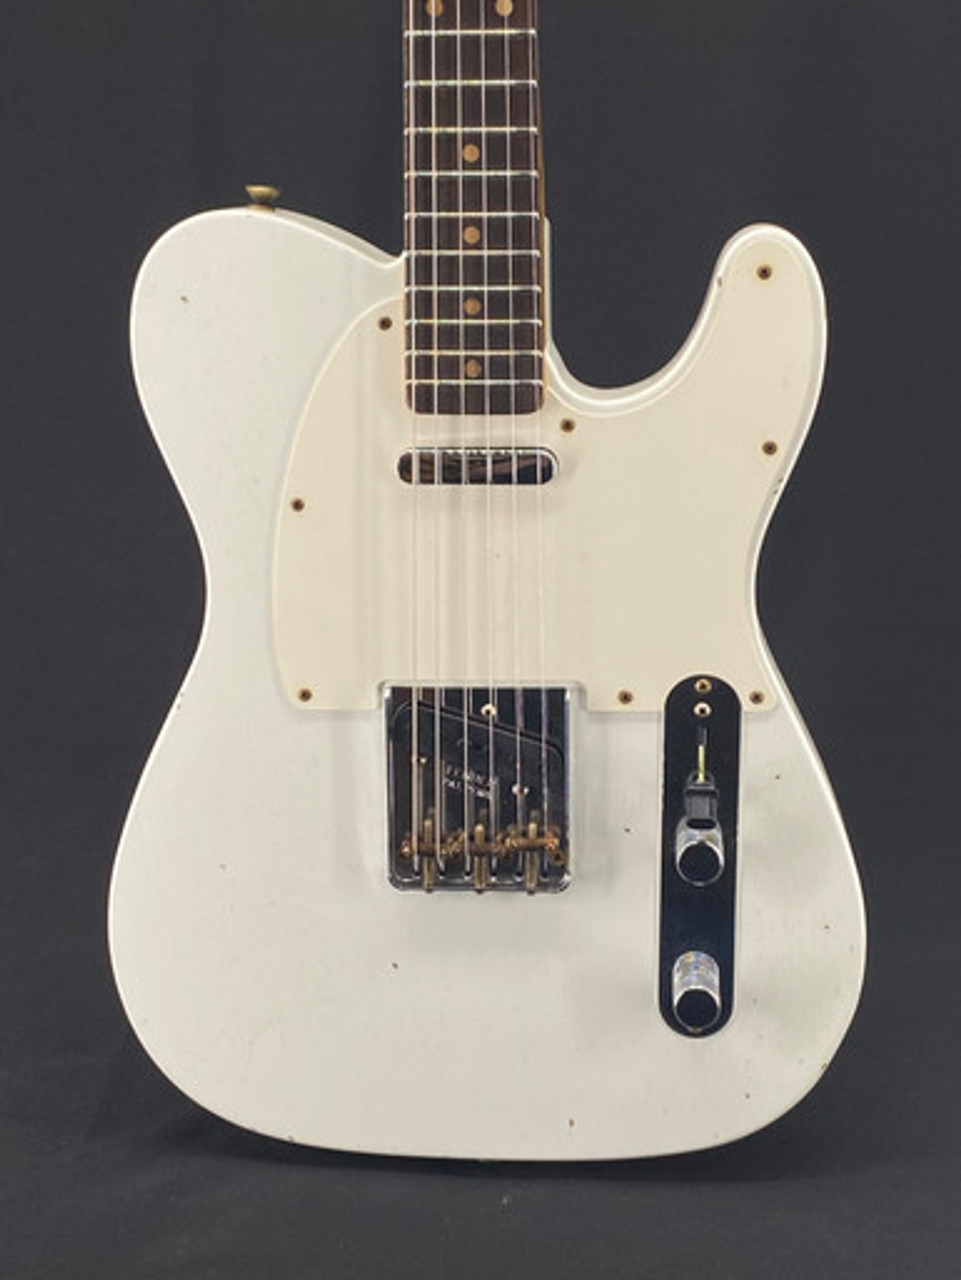 Fender Custom Shop Limited Edition 59 Telecaster Journeyman Relic in Aged Olympic White